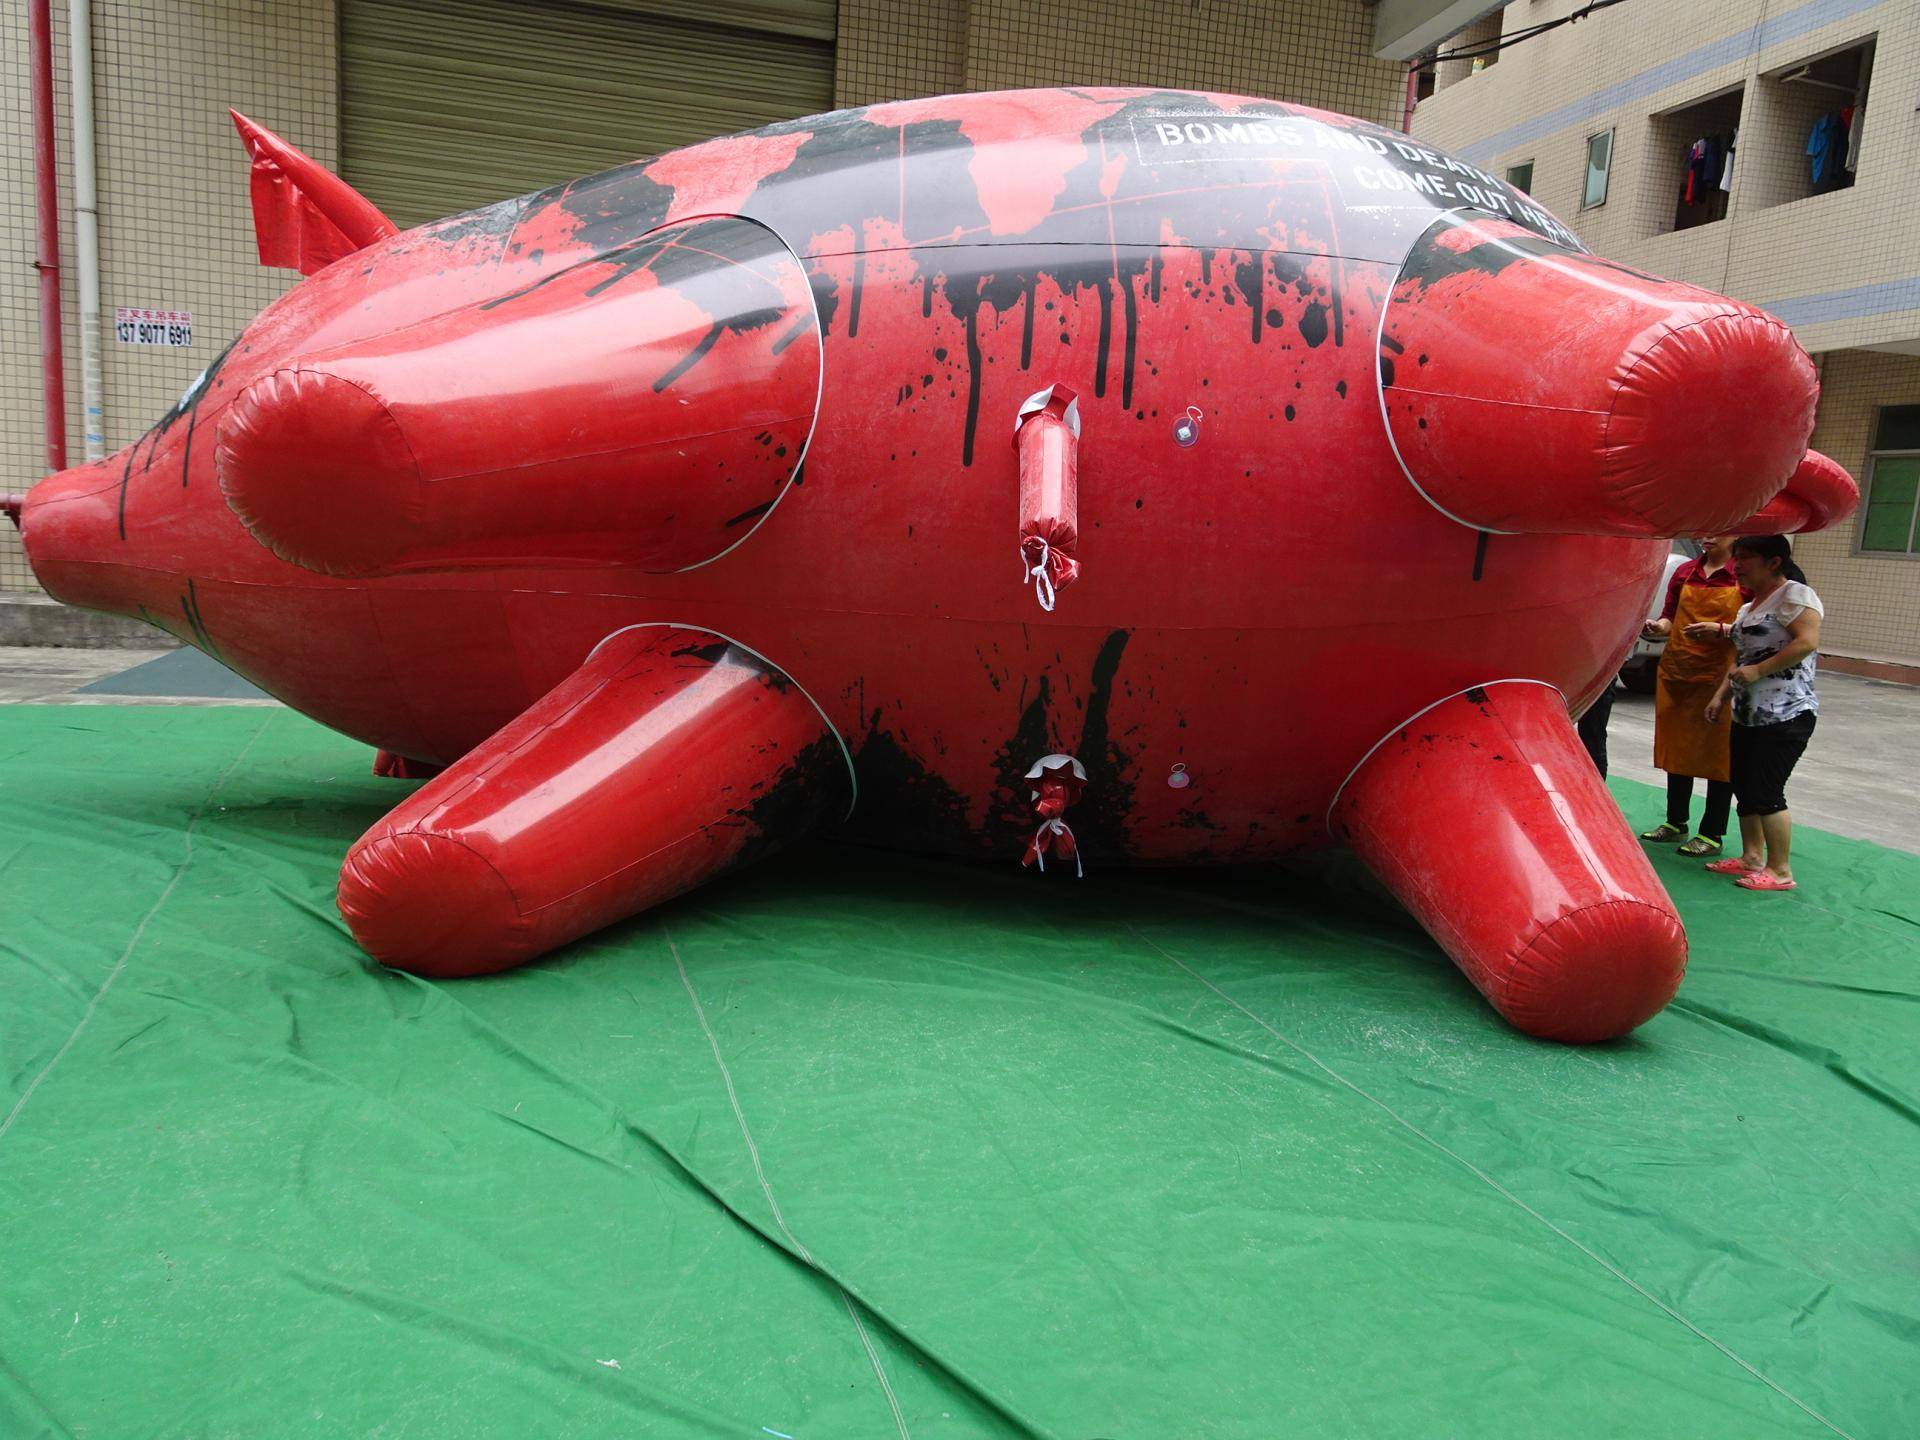 Customised Inflatable PVC Giant Large Huge Helium Pig Balloon Ready To Inflate With Air, Helium